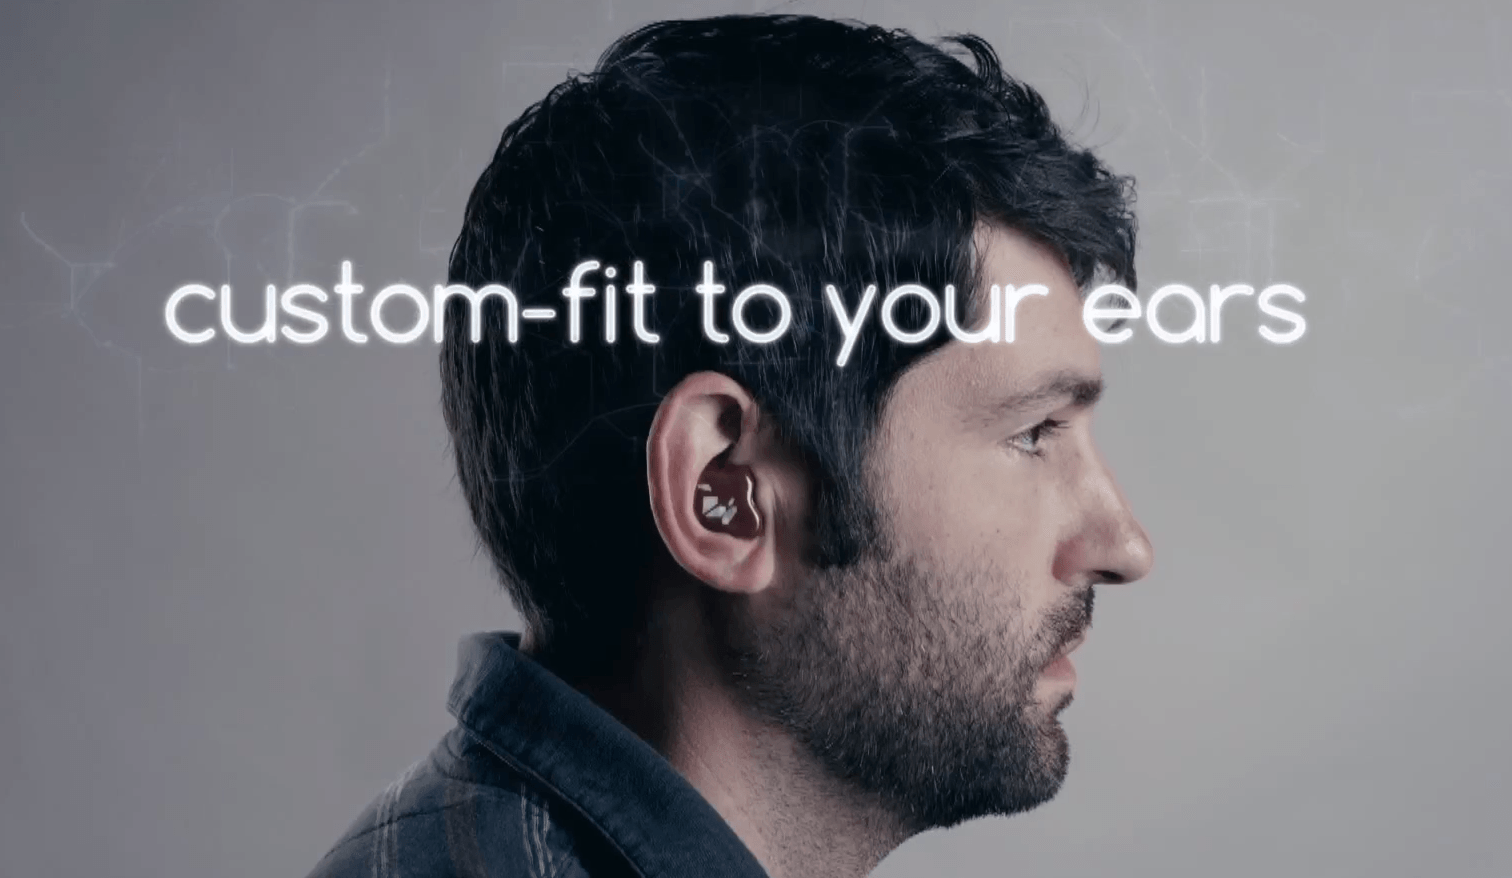 This Company Is Out To Make The Perfect Earbuds For The Ultimate Music Experience